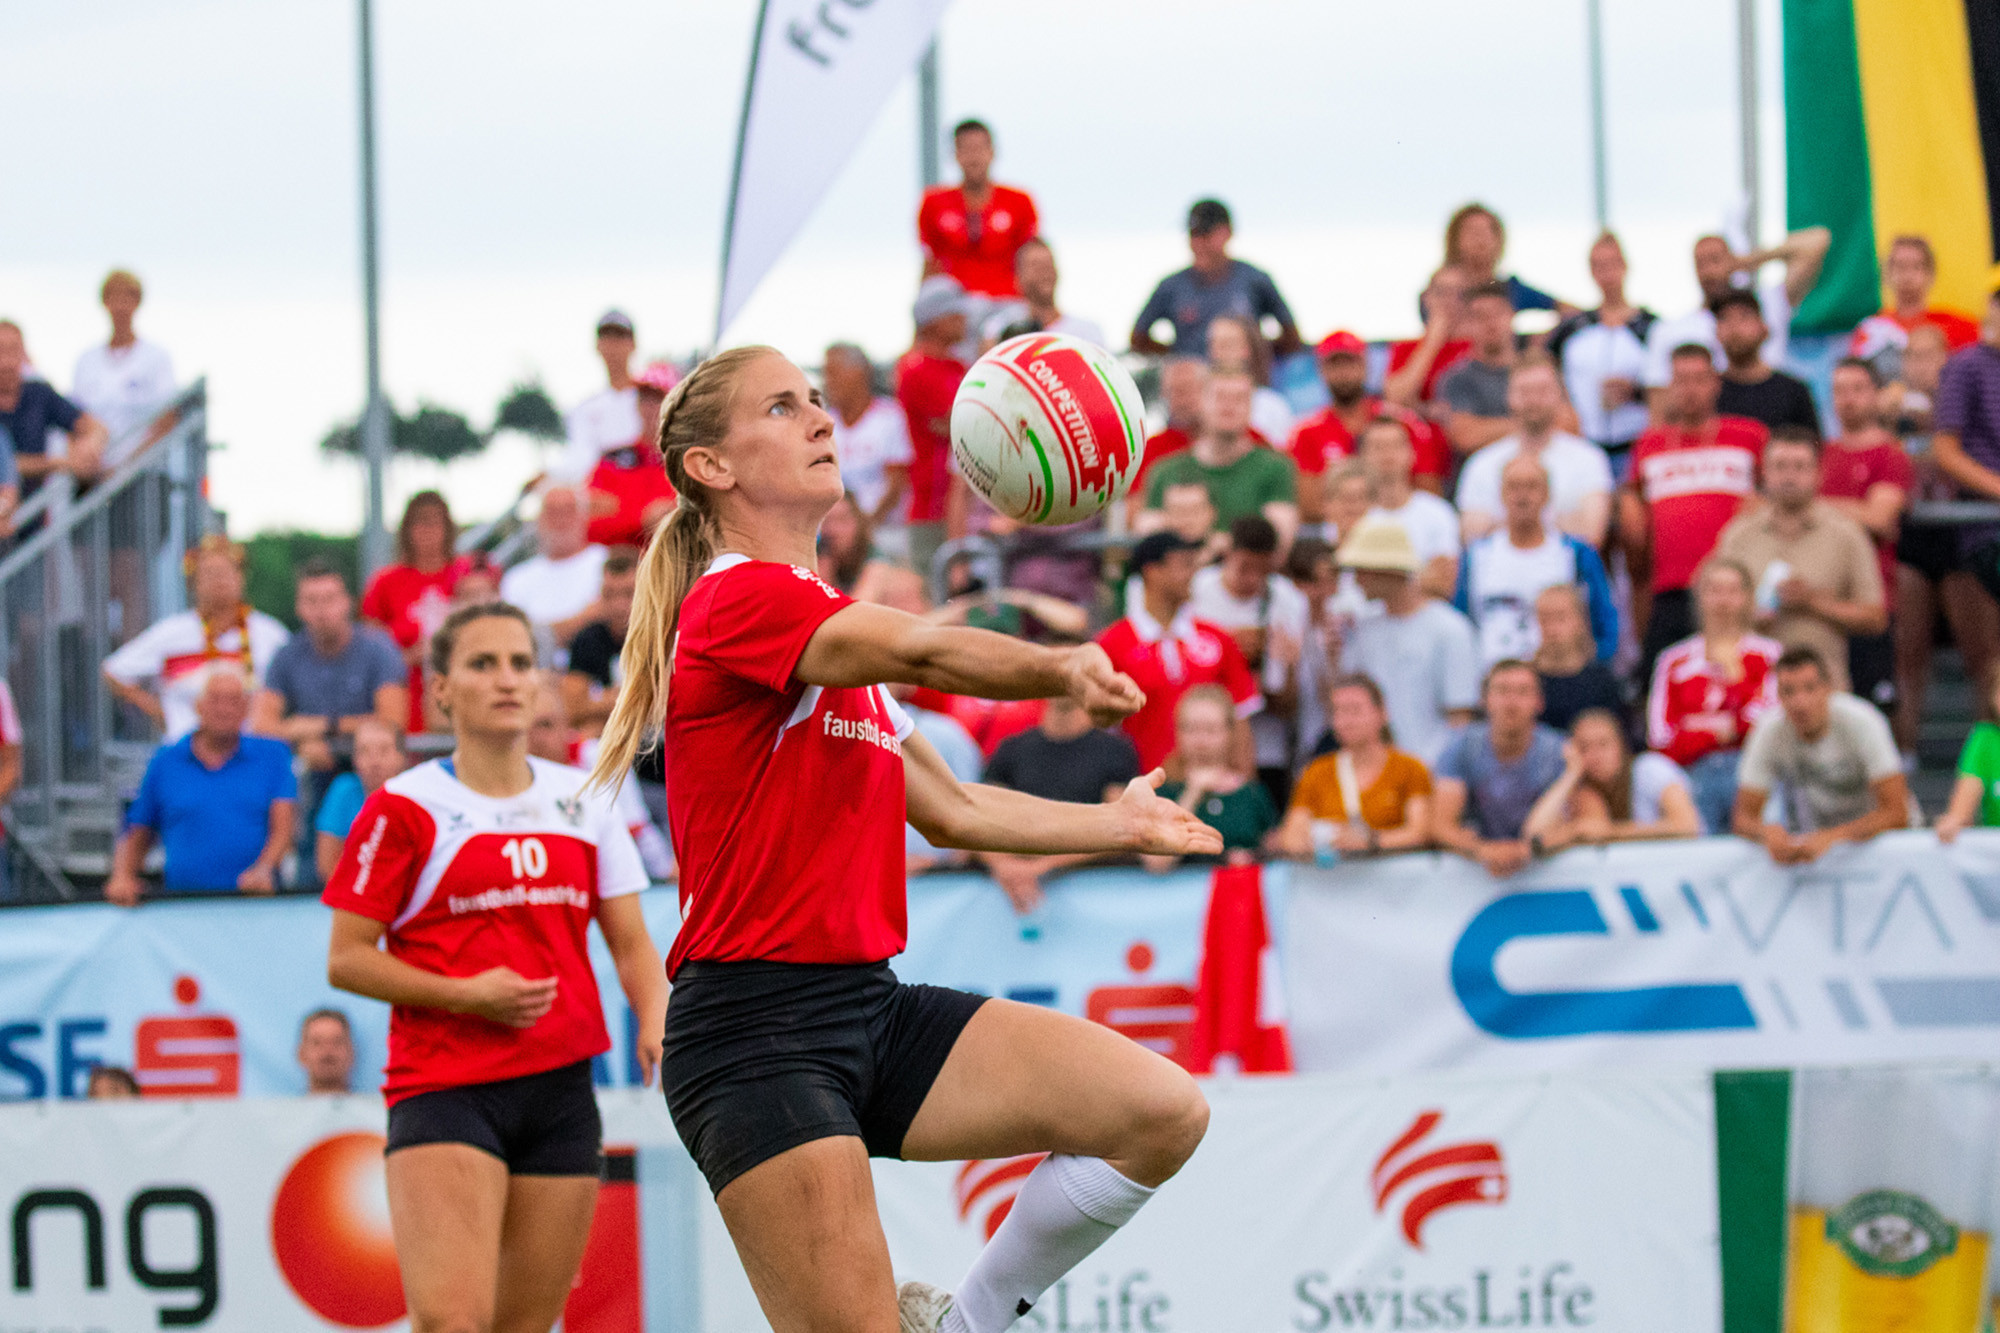 IFA launch new 2x2 format of fistball